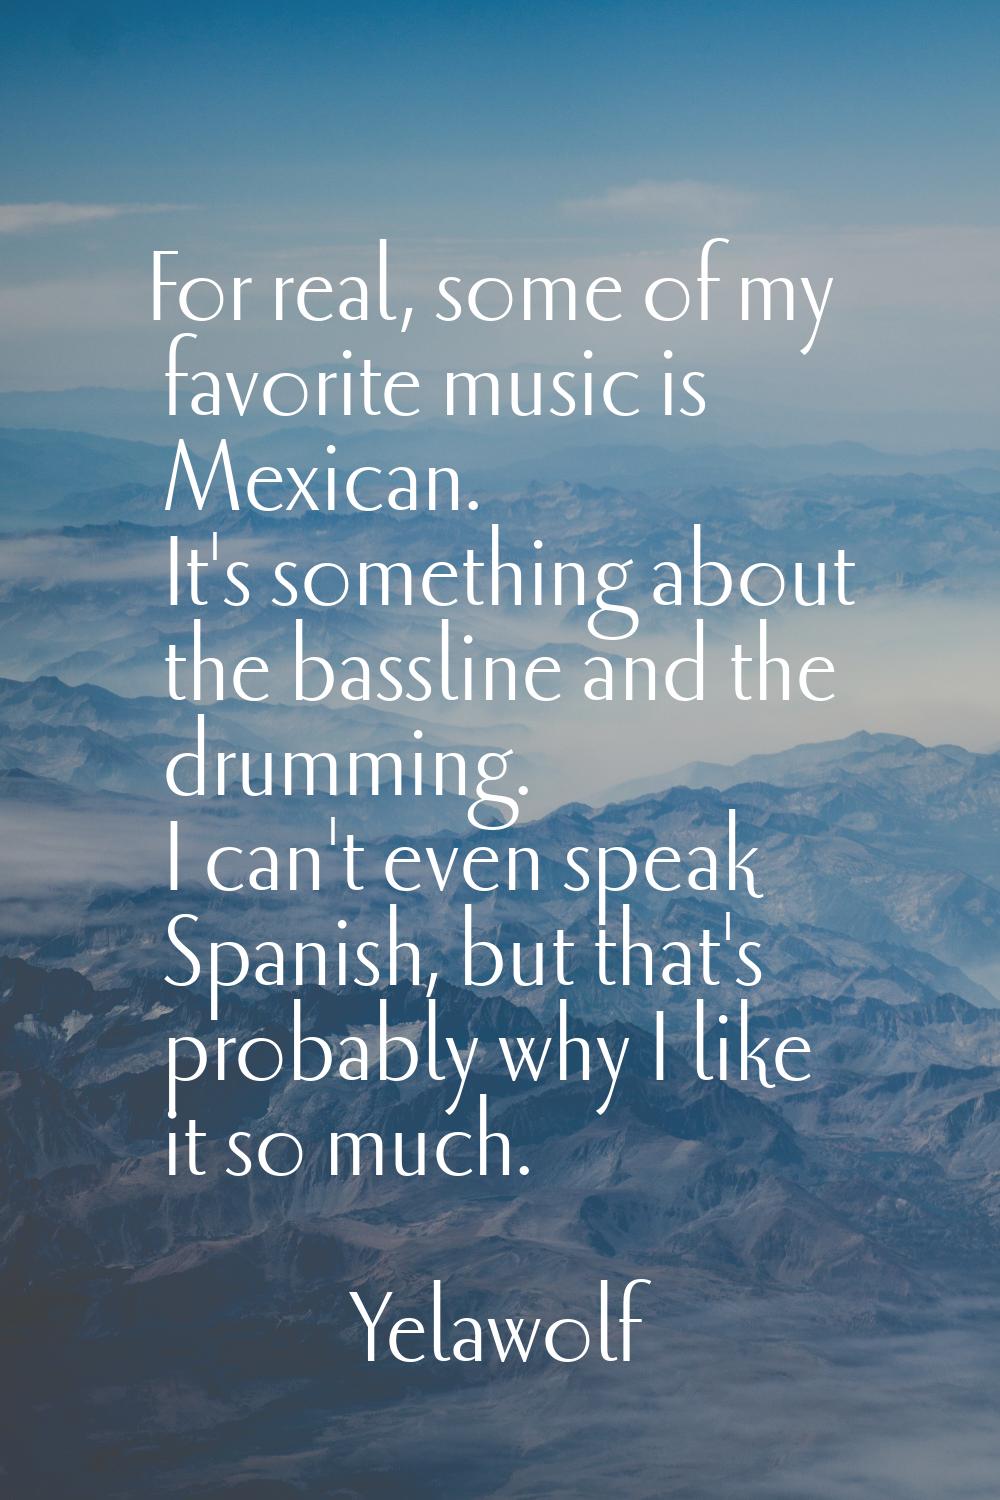 For real, some of my favorite music is Mexican. It's something about the bassline and the drumming.